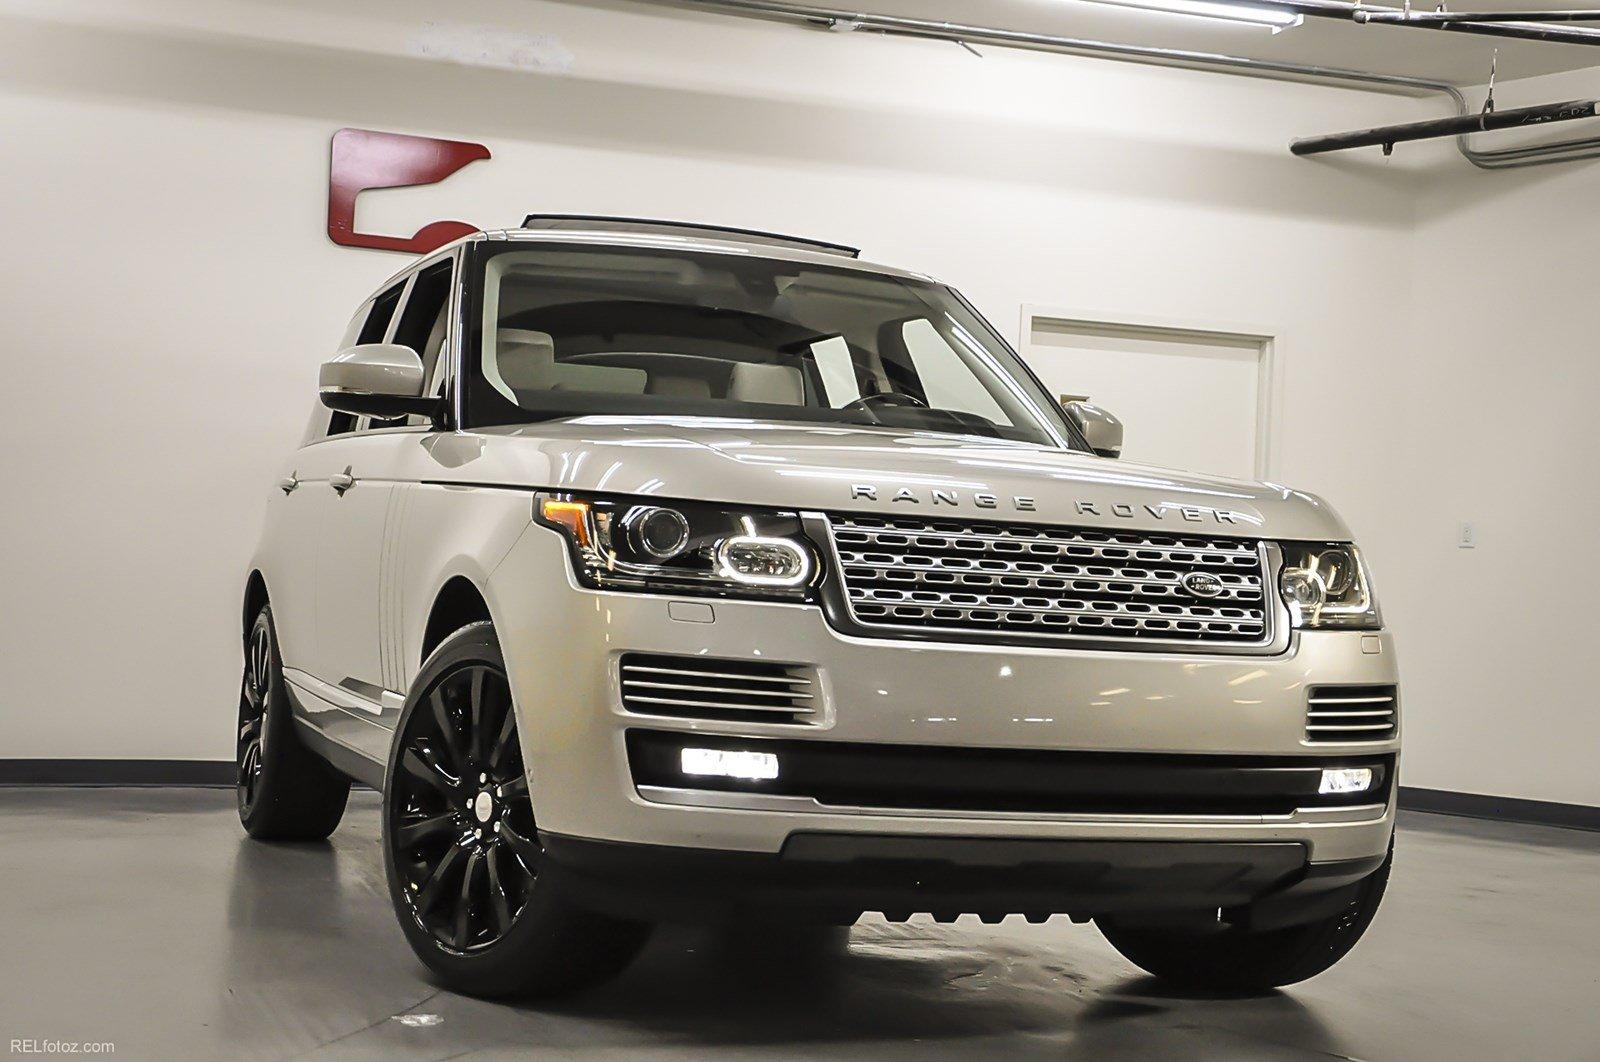 Used 2014 Land Rover Range Rover Supercharged for sale Sold at Gravity Autos Marietta in Marietta GA 30060 2